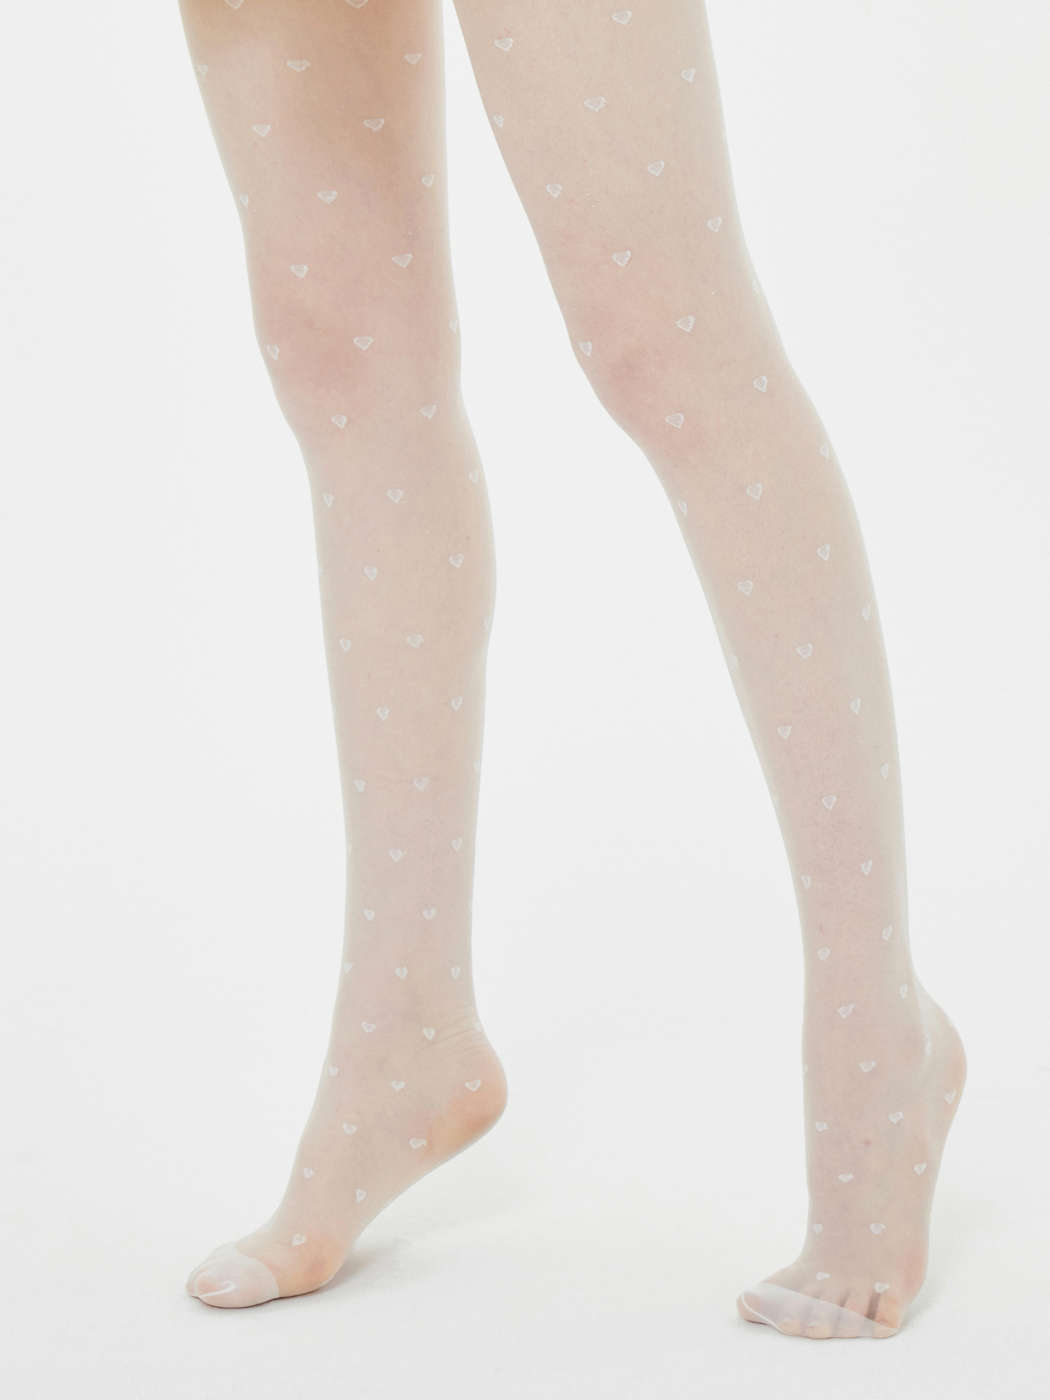 Heart Tights/Stockings (White)